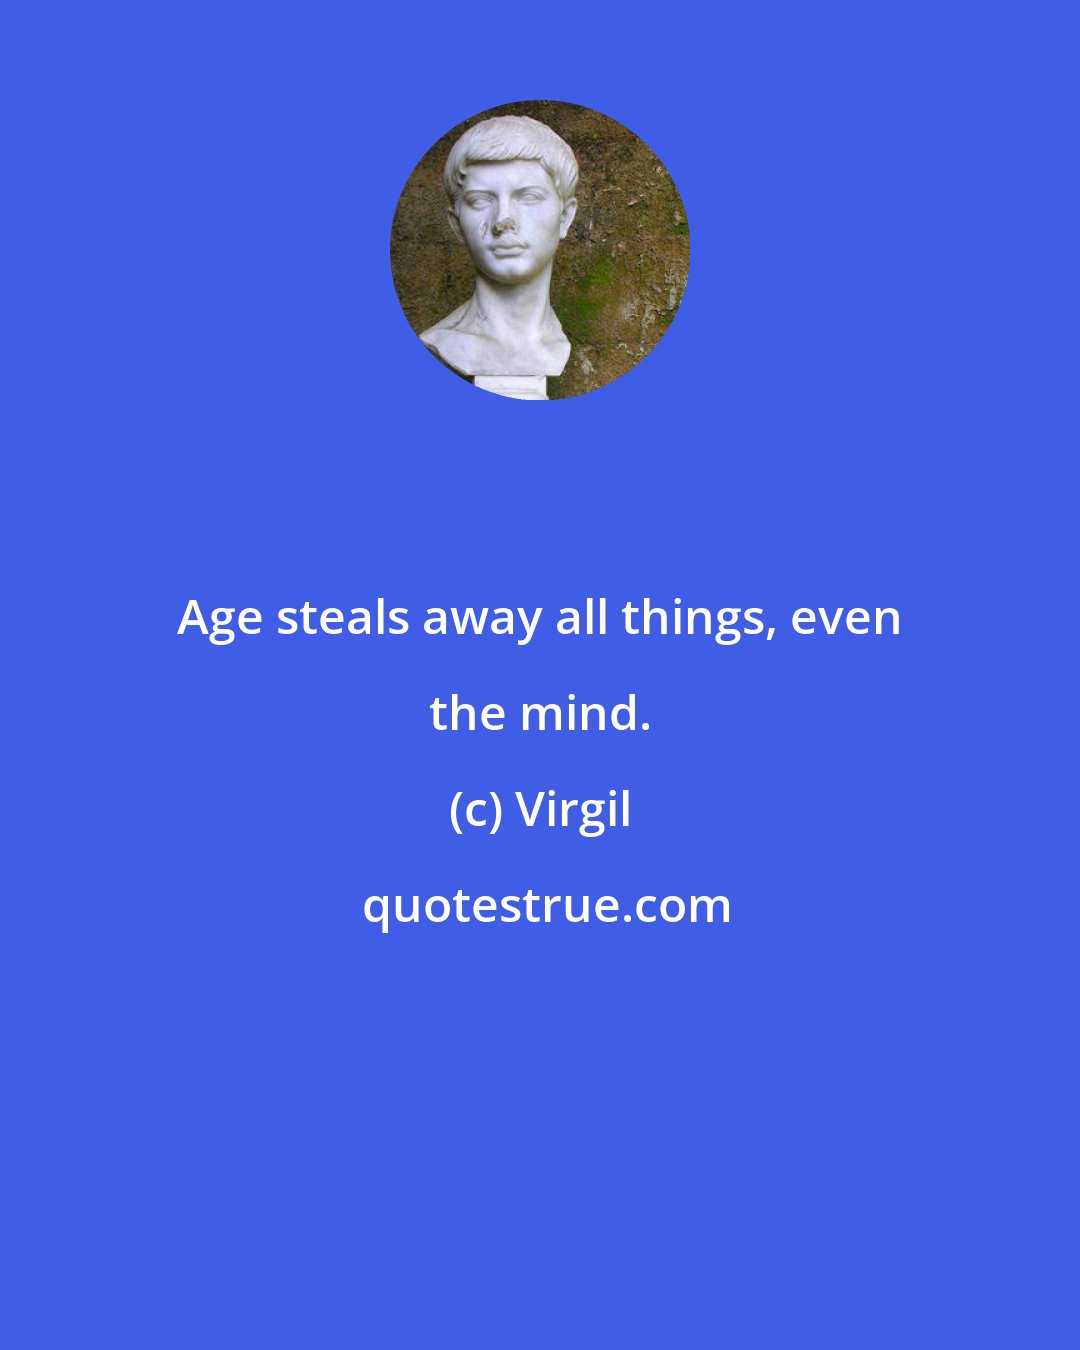 Virgil: Age steals away all things, even the mind.